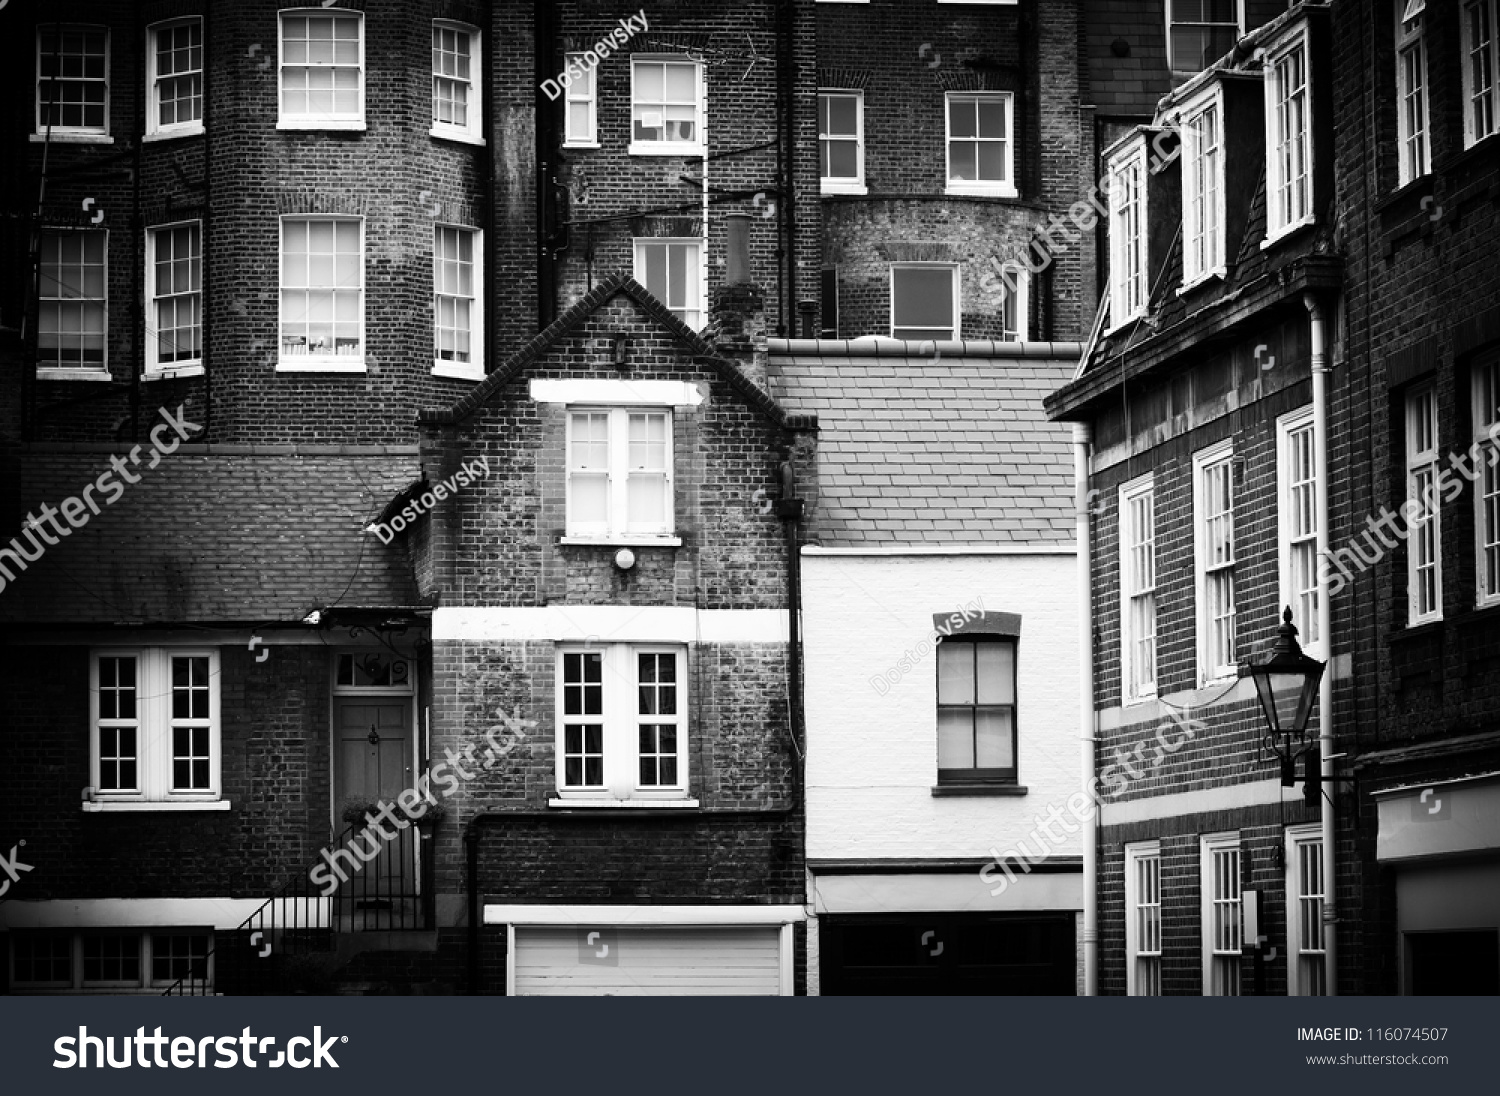 Ancient Architecture Of London Stock Photo 116074507 : Shutterstock